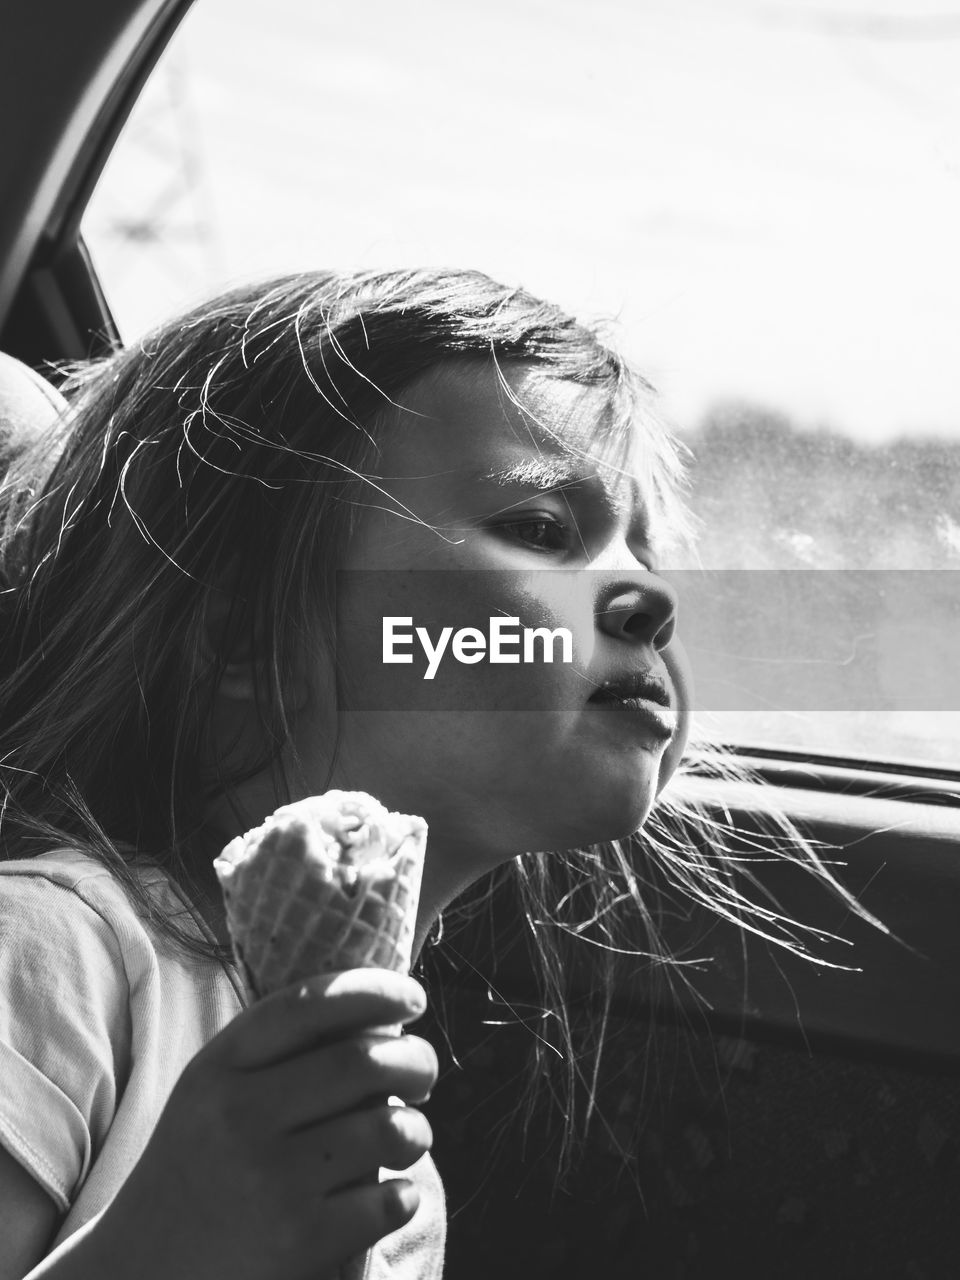 Girl holding ice cream cone while looking away in car